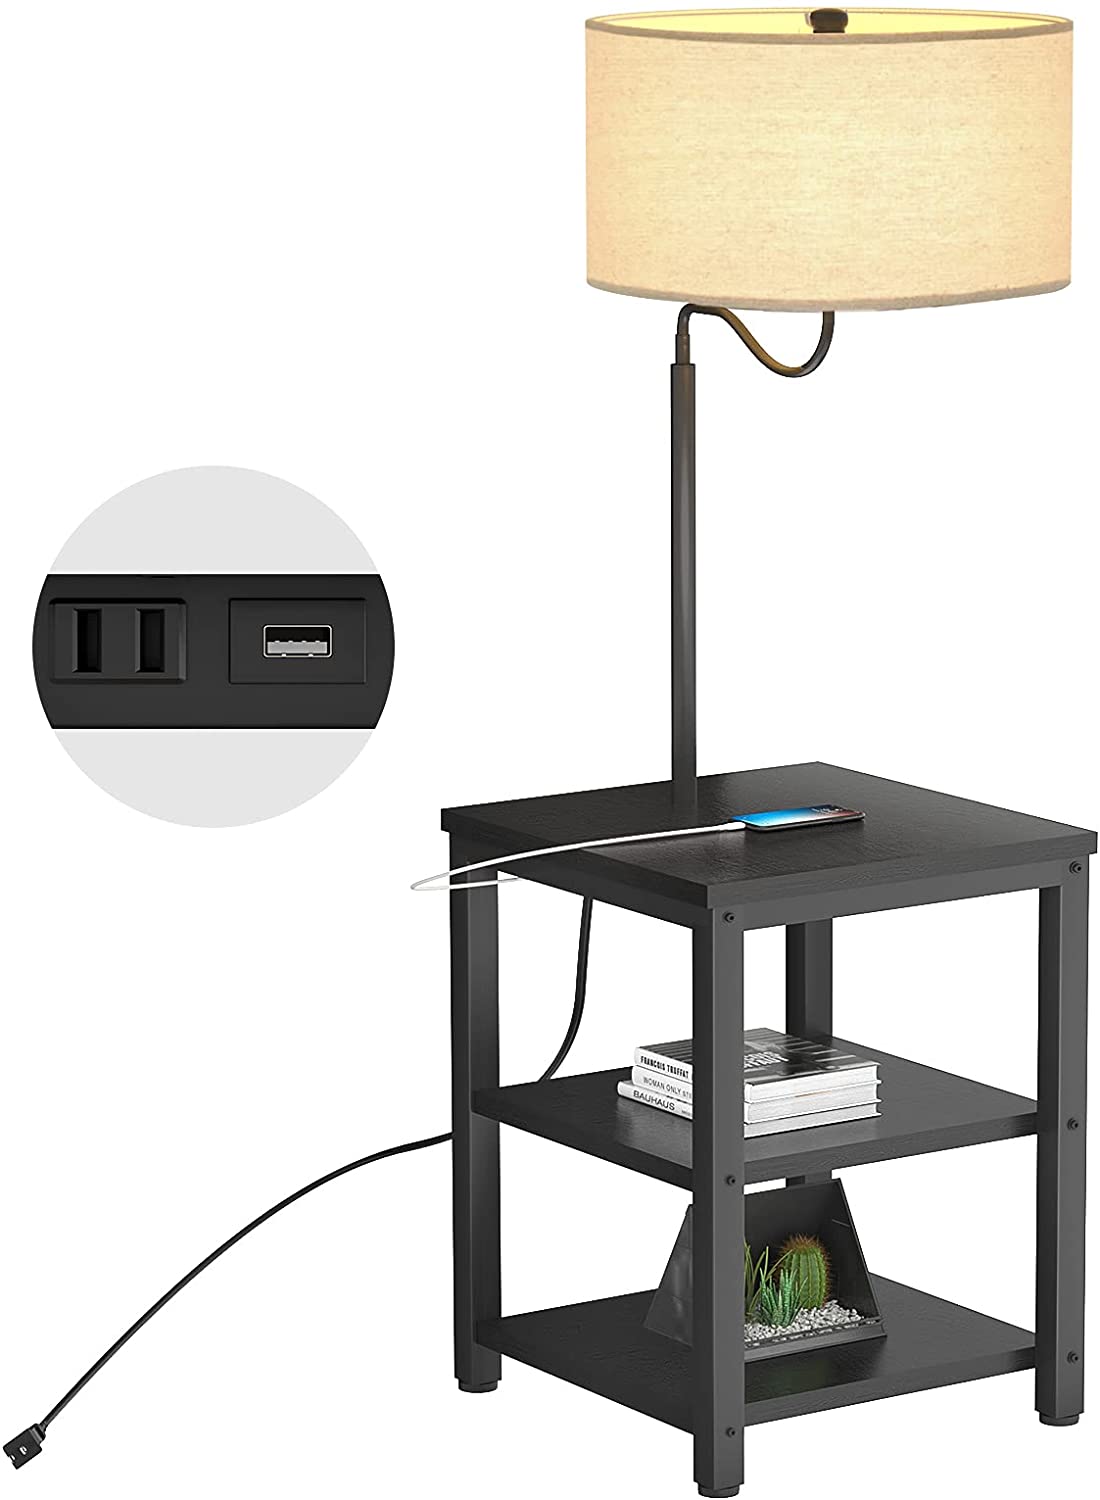 Antlux Floor Lamp With Side Table And, Ledlux Smith Led Table Lamp With Usb Port In Black